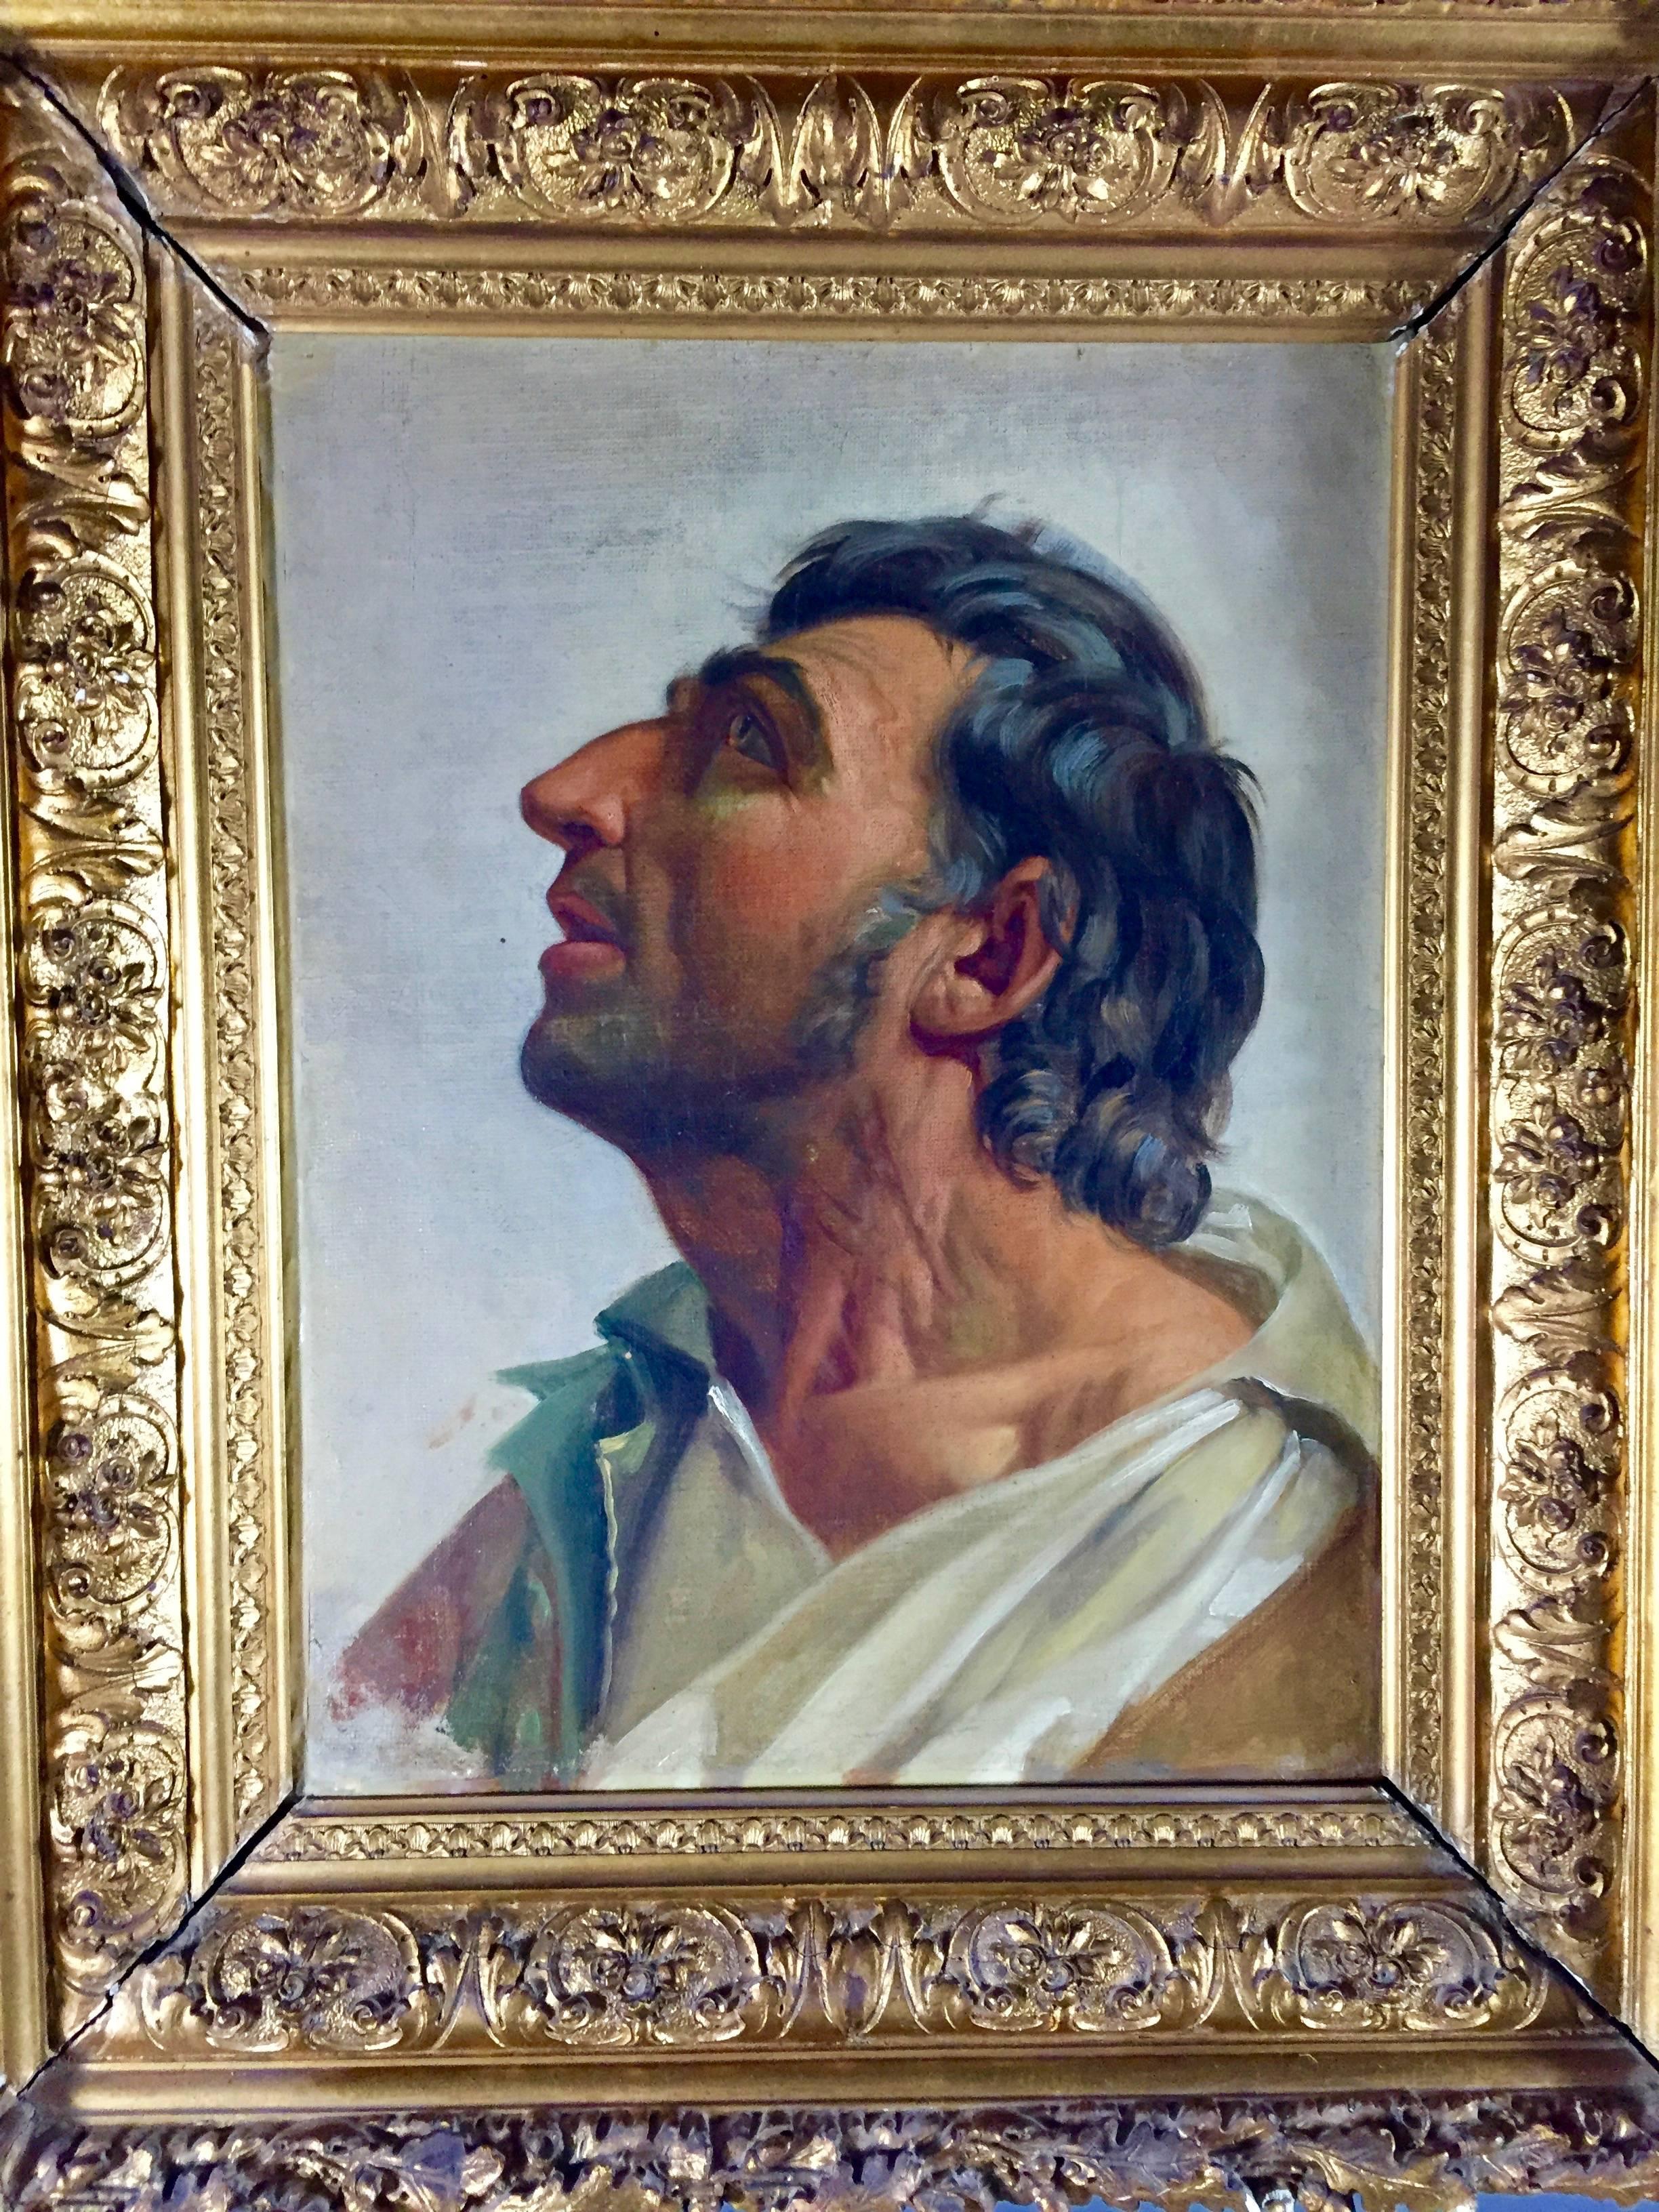 A magnificent portrait of a male in profile with vintage gilt frame, oil on canvas, unsigned, 19th century. Purchased in Denmark.